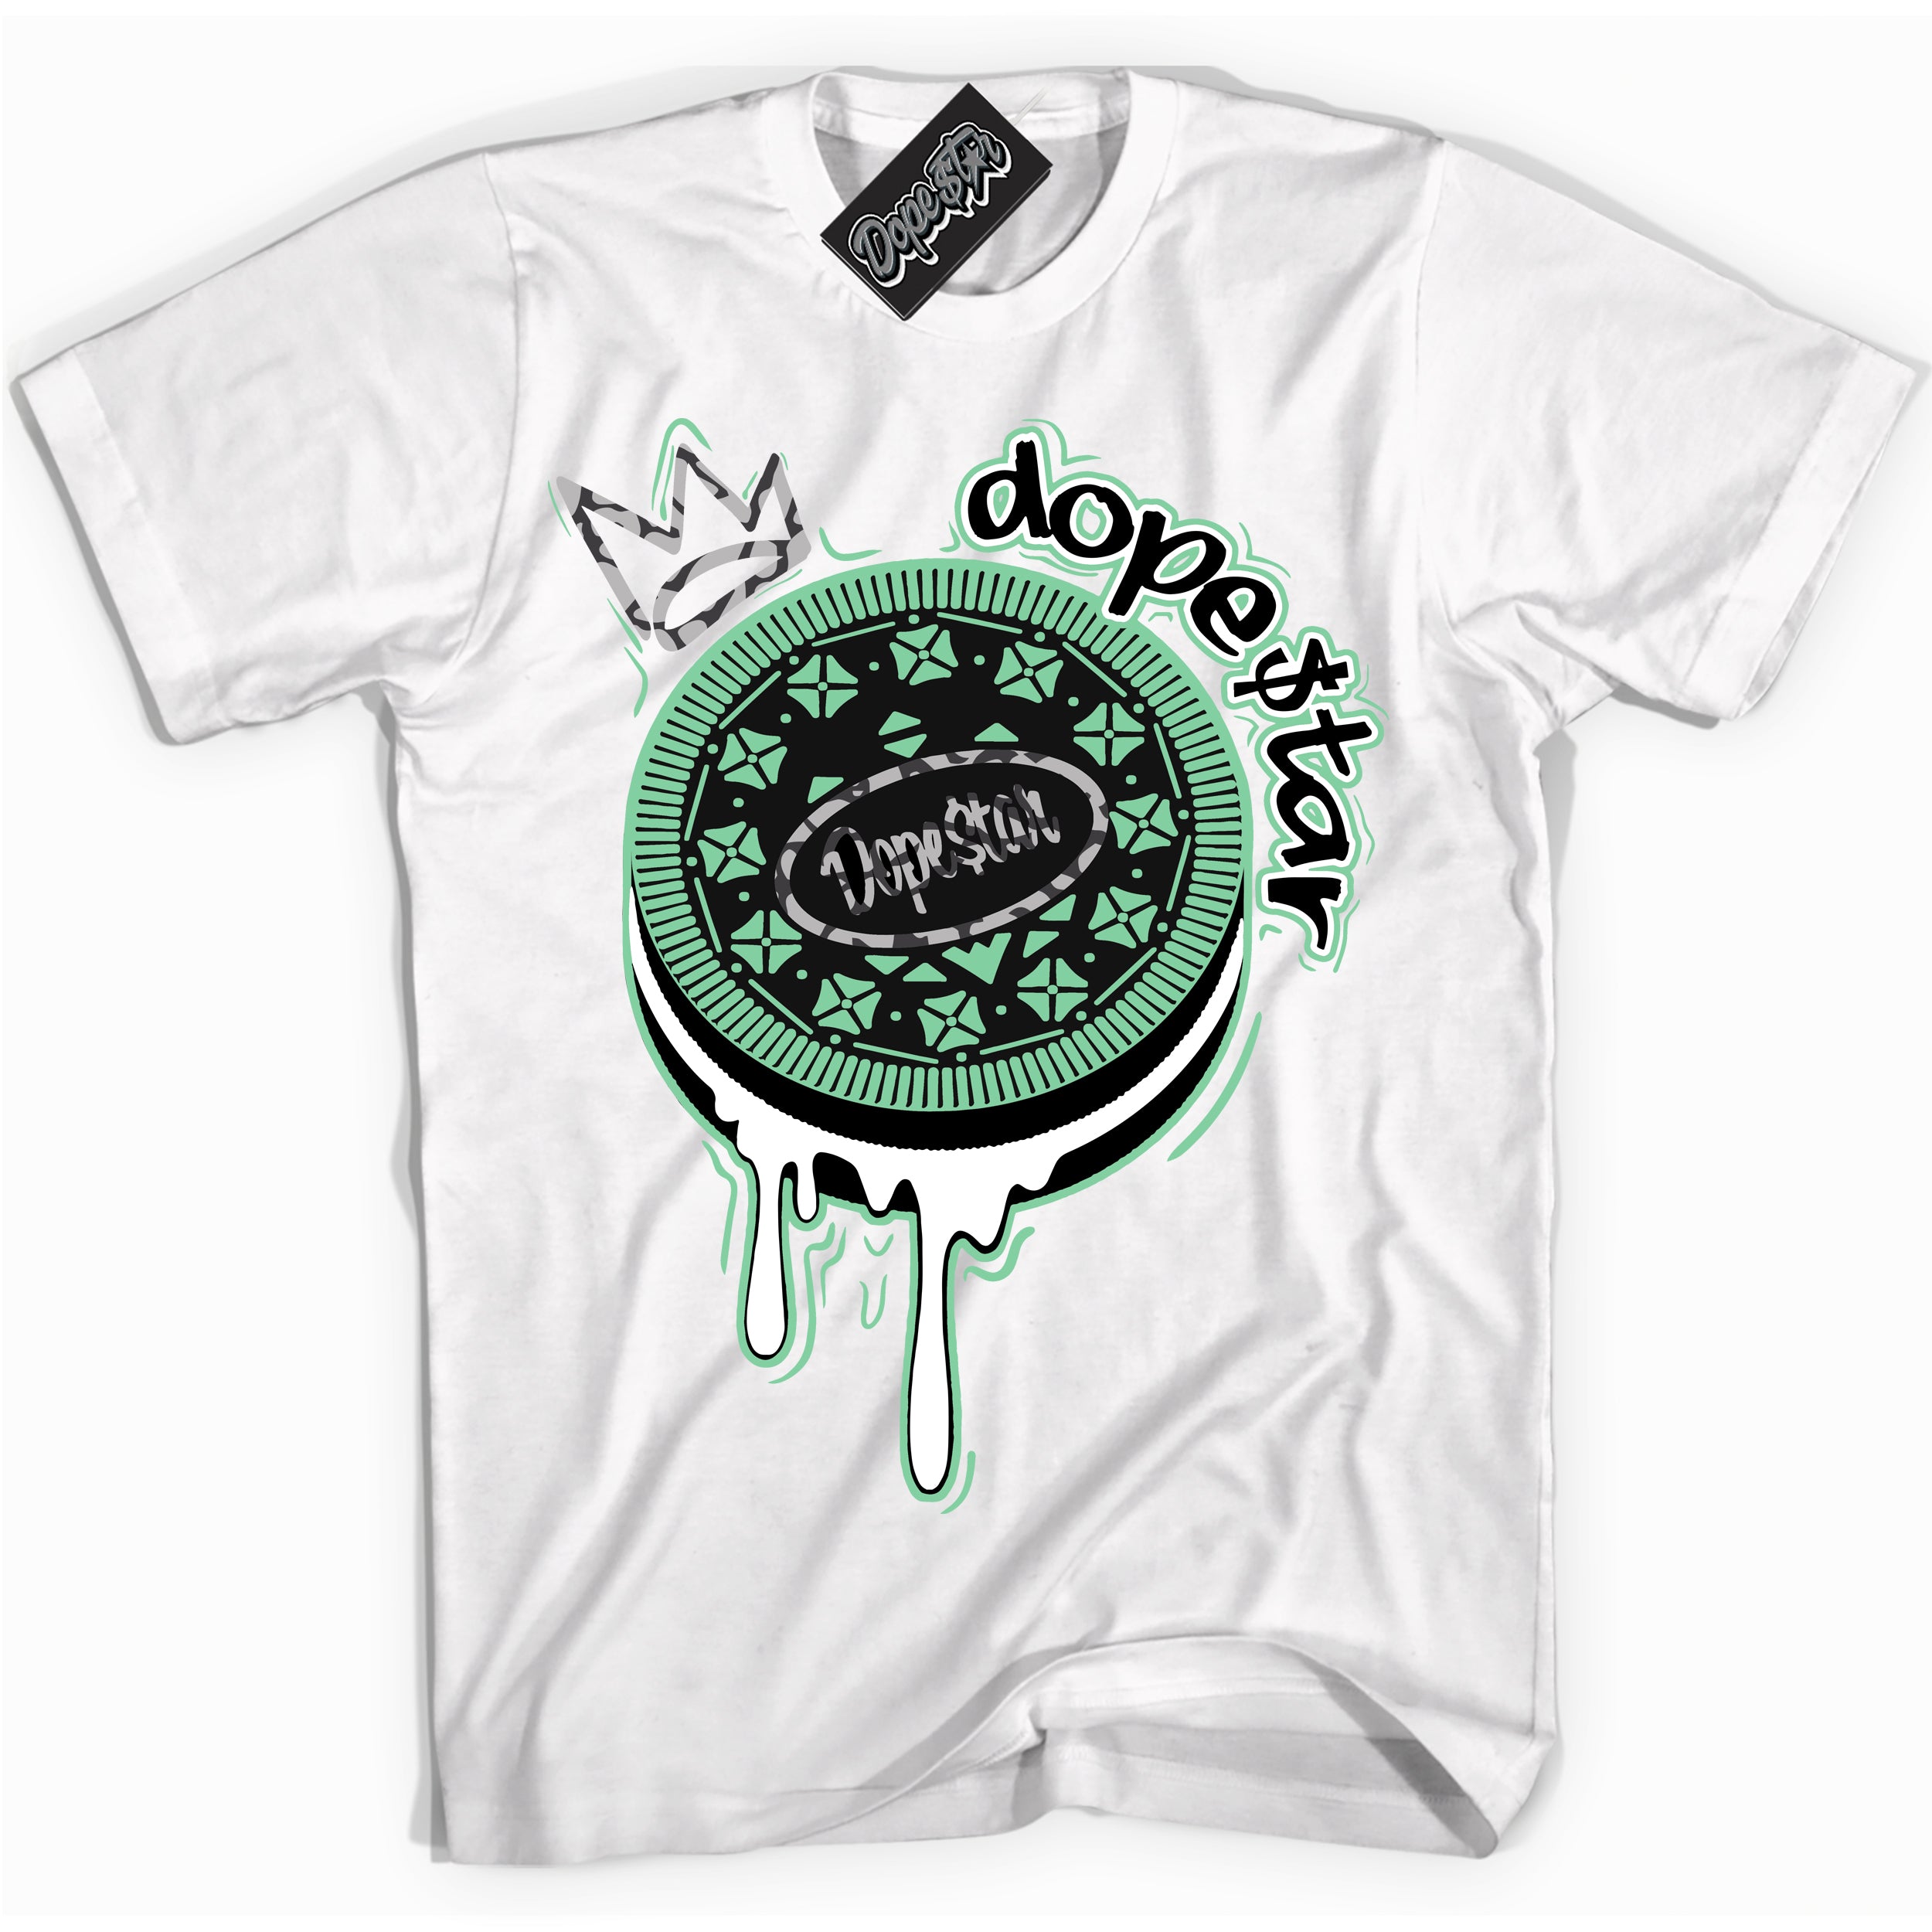 Cool White graphic tee with “ Oreo DS ” design, that perfectly matches Green Glow 3s sneakers 